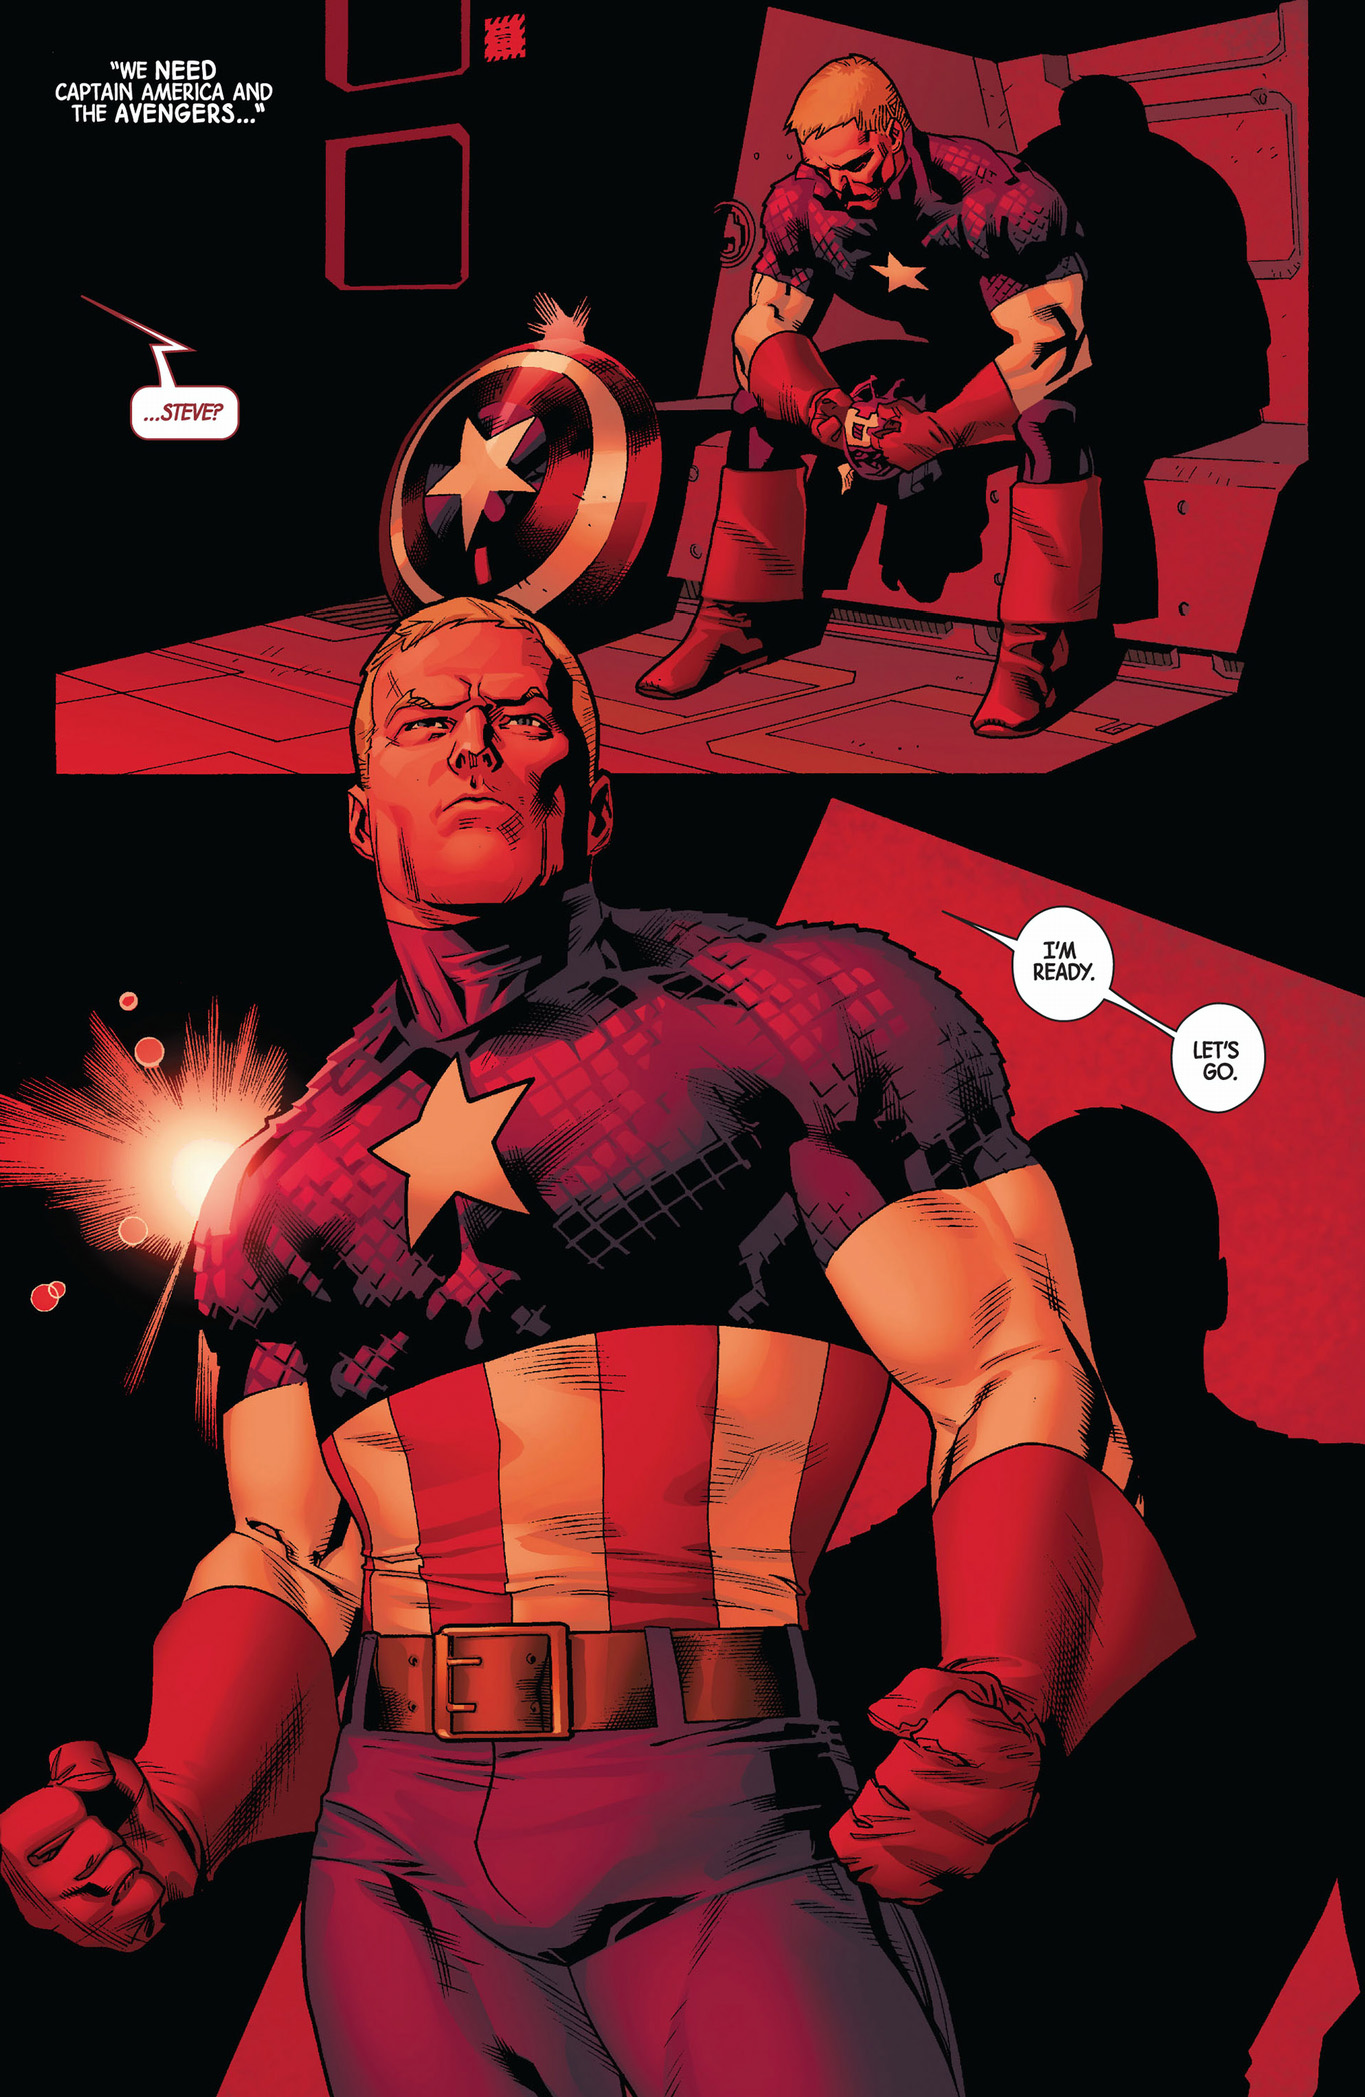 steve rogers becomes captain america (fear itself)